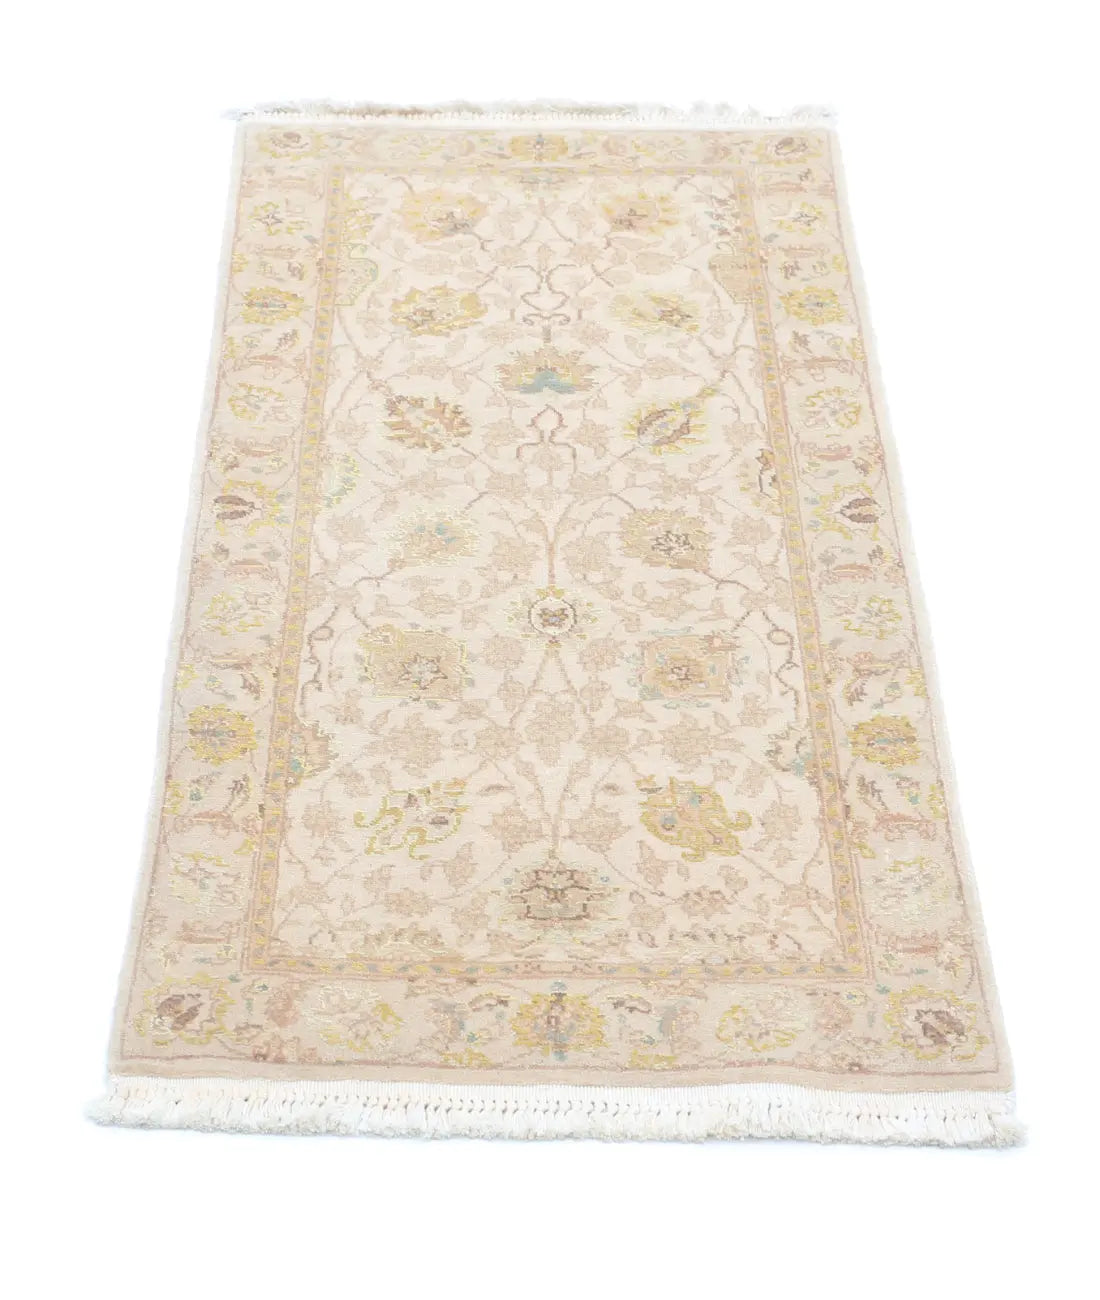 Hand Knotted Agra Kashan Wool Rug - 2'0'' x 4'1''